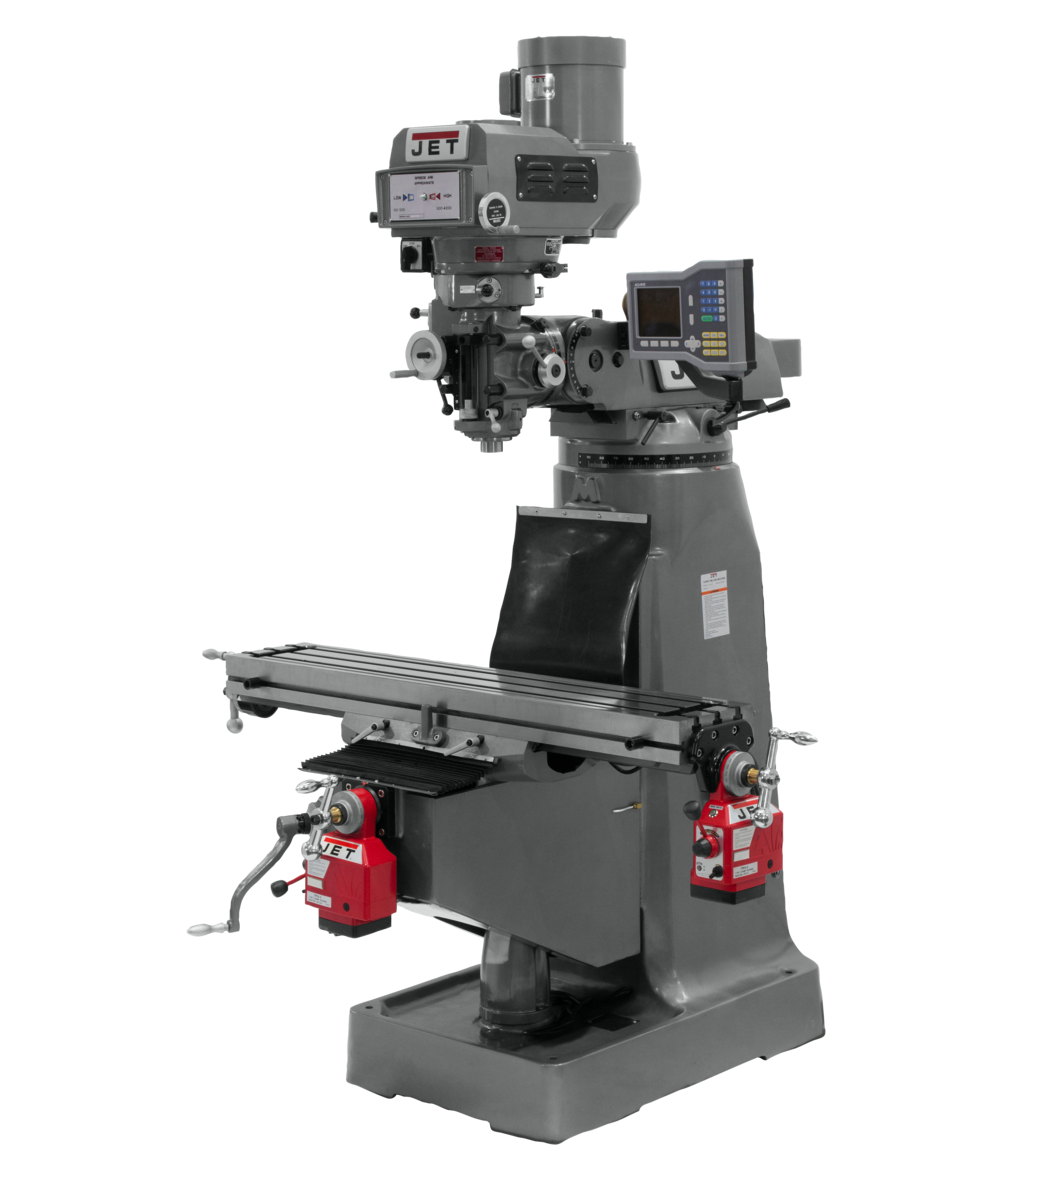 JTM-4VS-1 Mill With 3-Axis ACU-RITE 203 DRO (Knee) With X and Y-Axis Powerfeeds